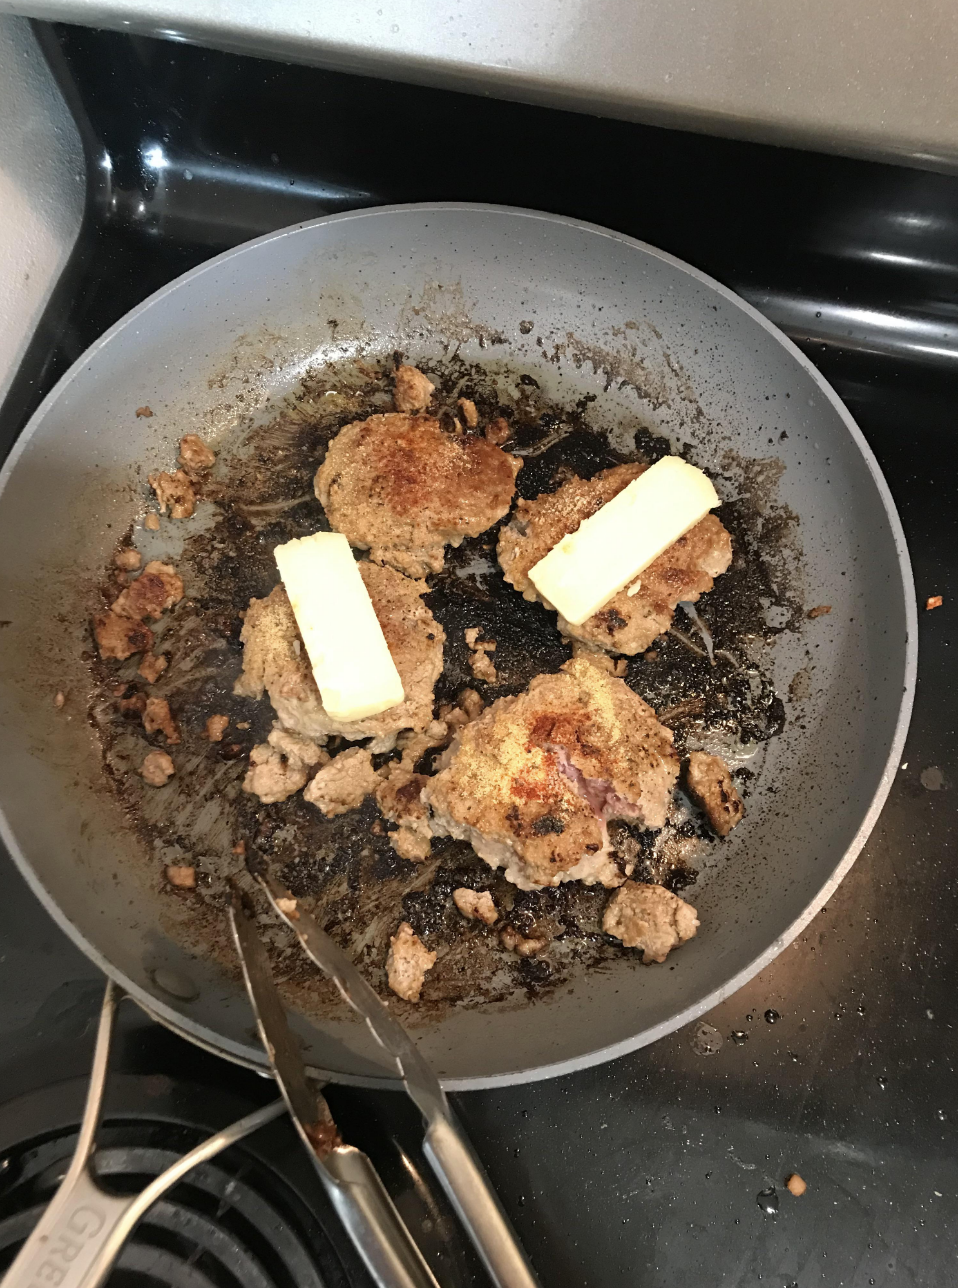 A look inside a pan in which four burger patties have been overcooked and the dry spices used have also been overcooked and covered the pan in a layer of soot